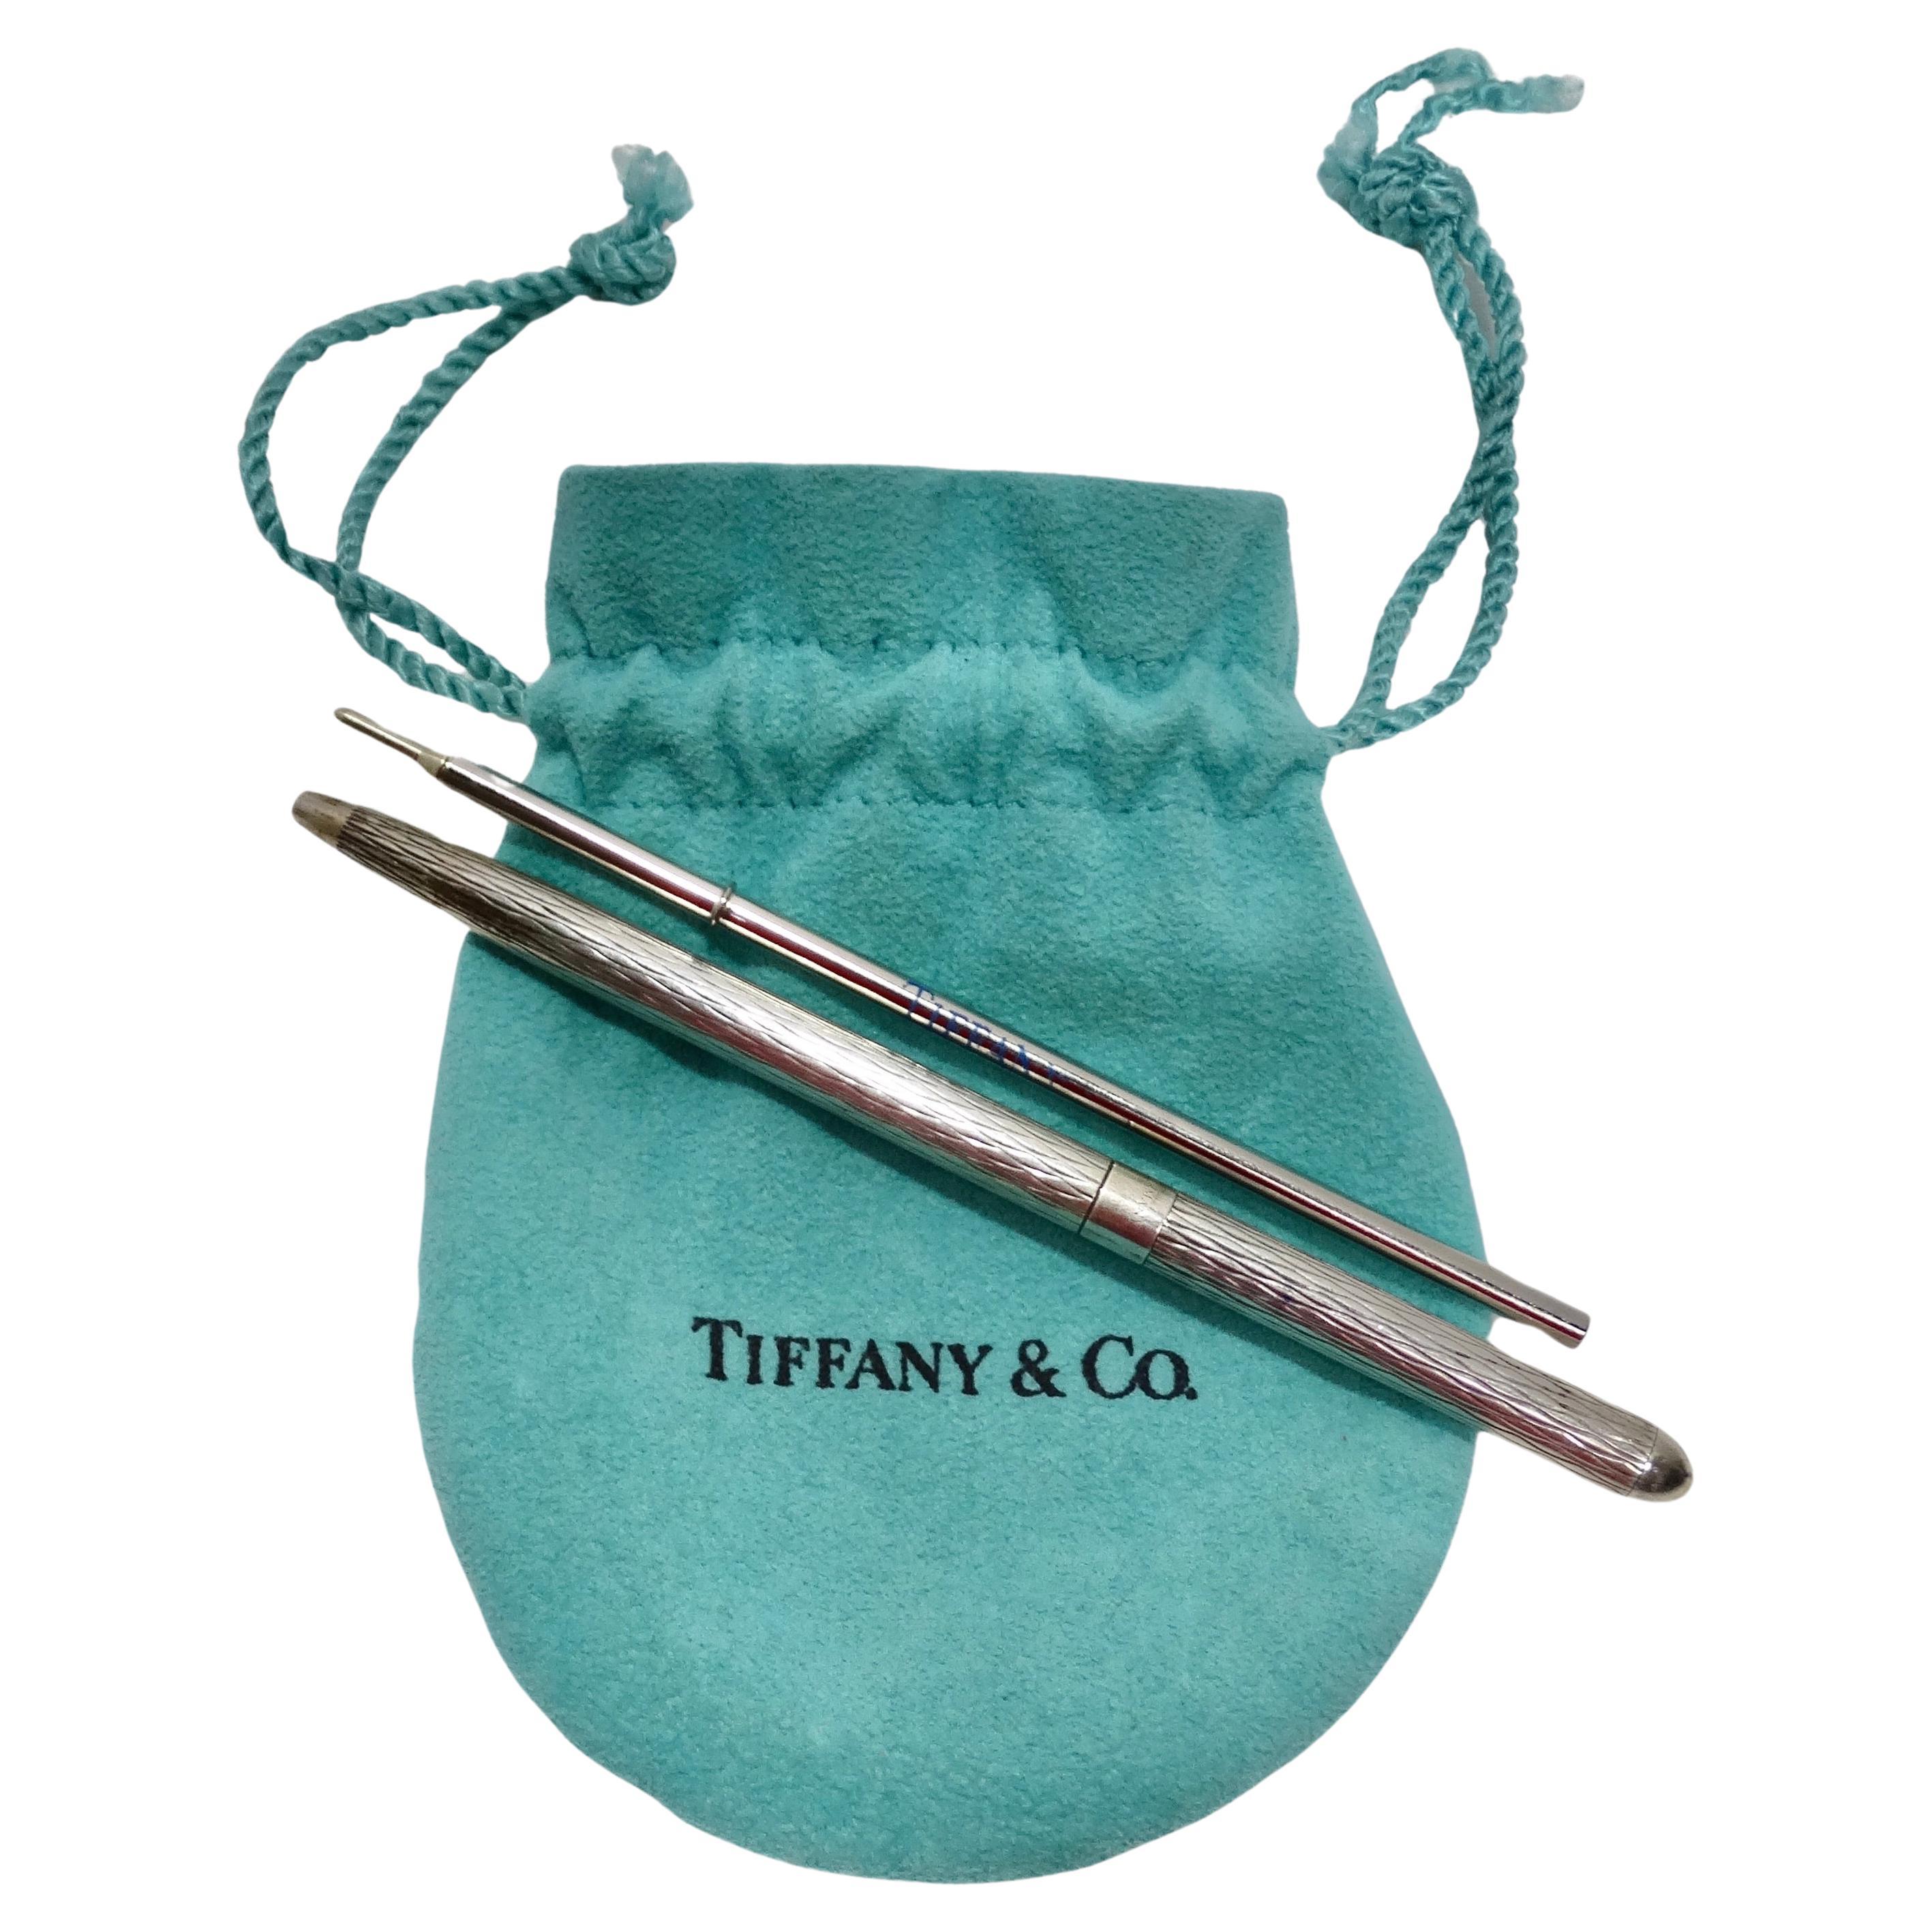 Tiffany & Co 1950s Pure Silver Pen & Ink Set For Sale